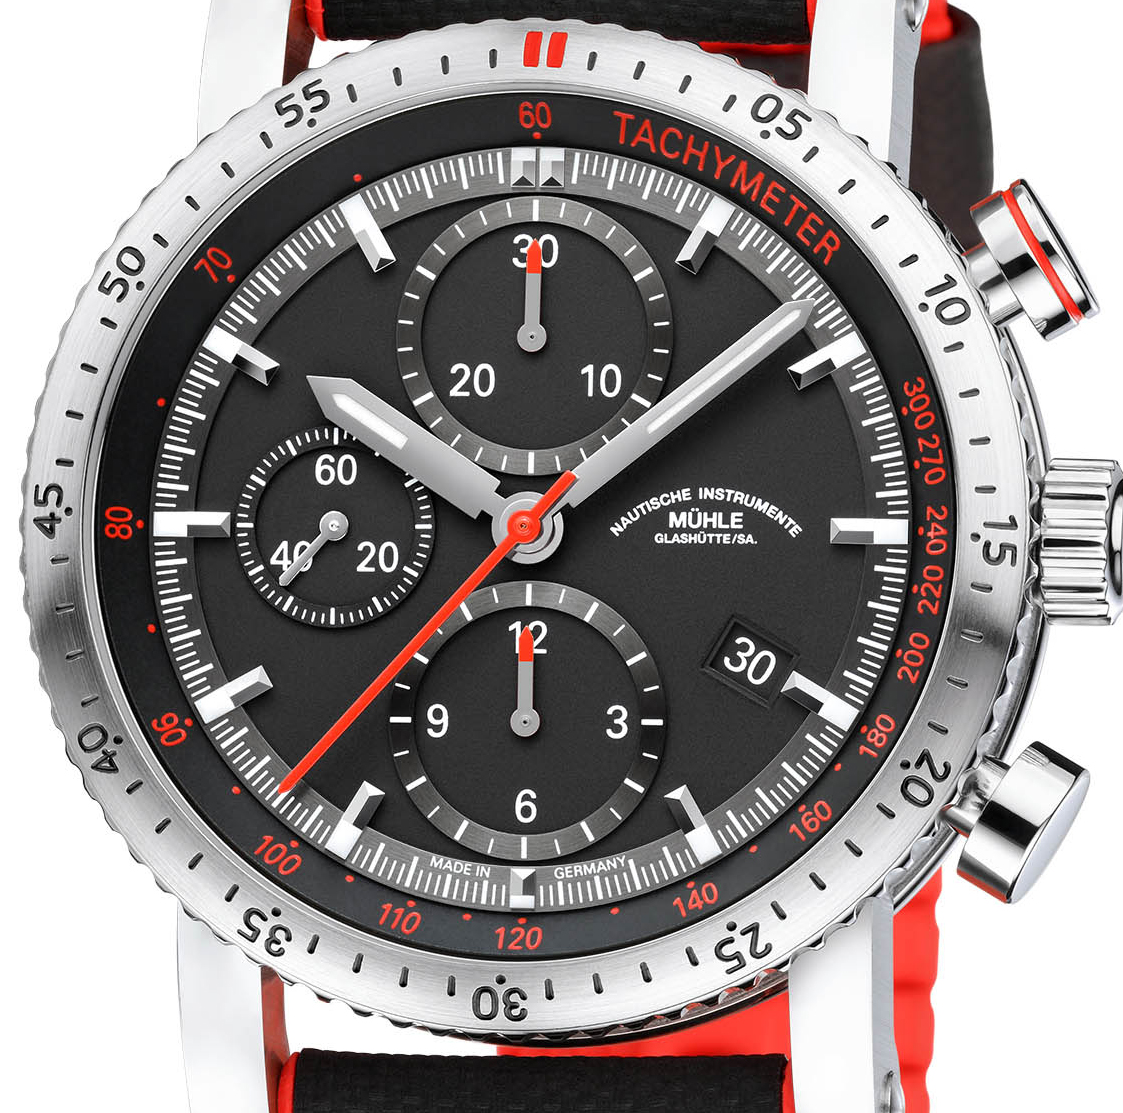 The chronograph hands are highlighted in red, matching the numerals on the tachymeter scale.